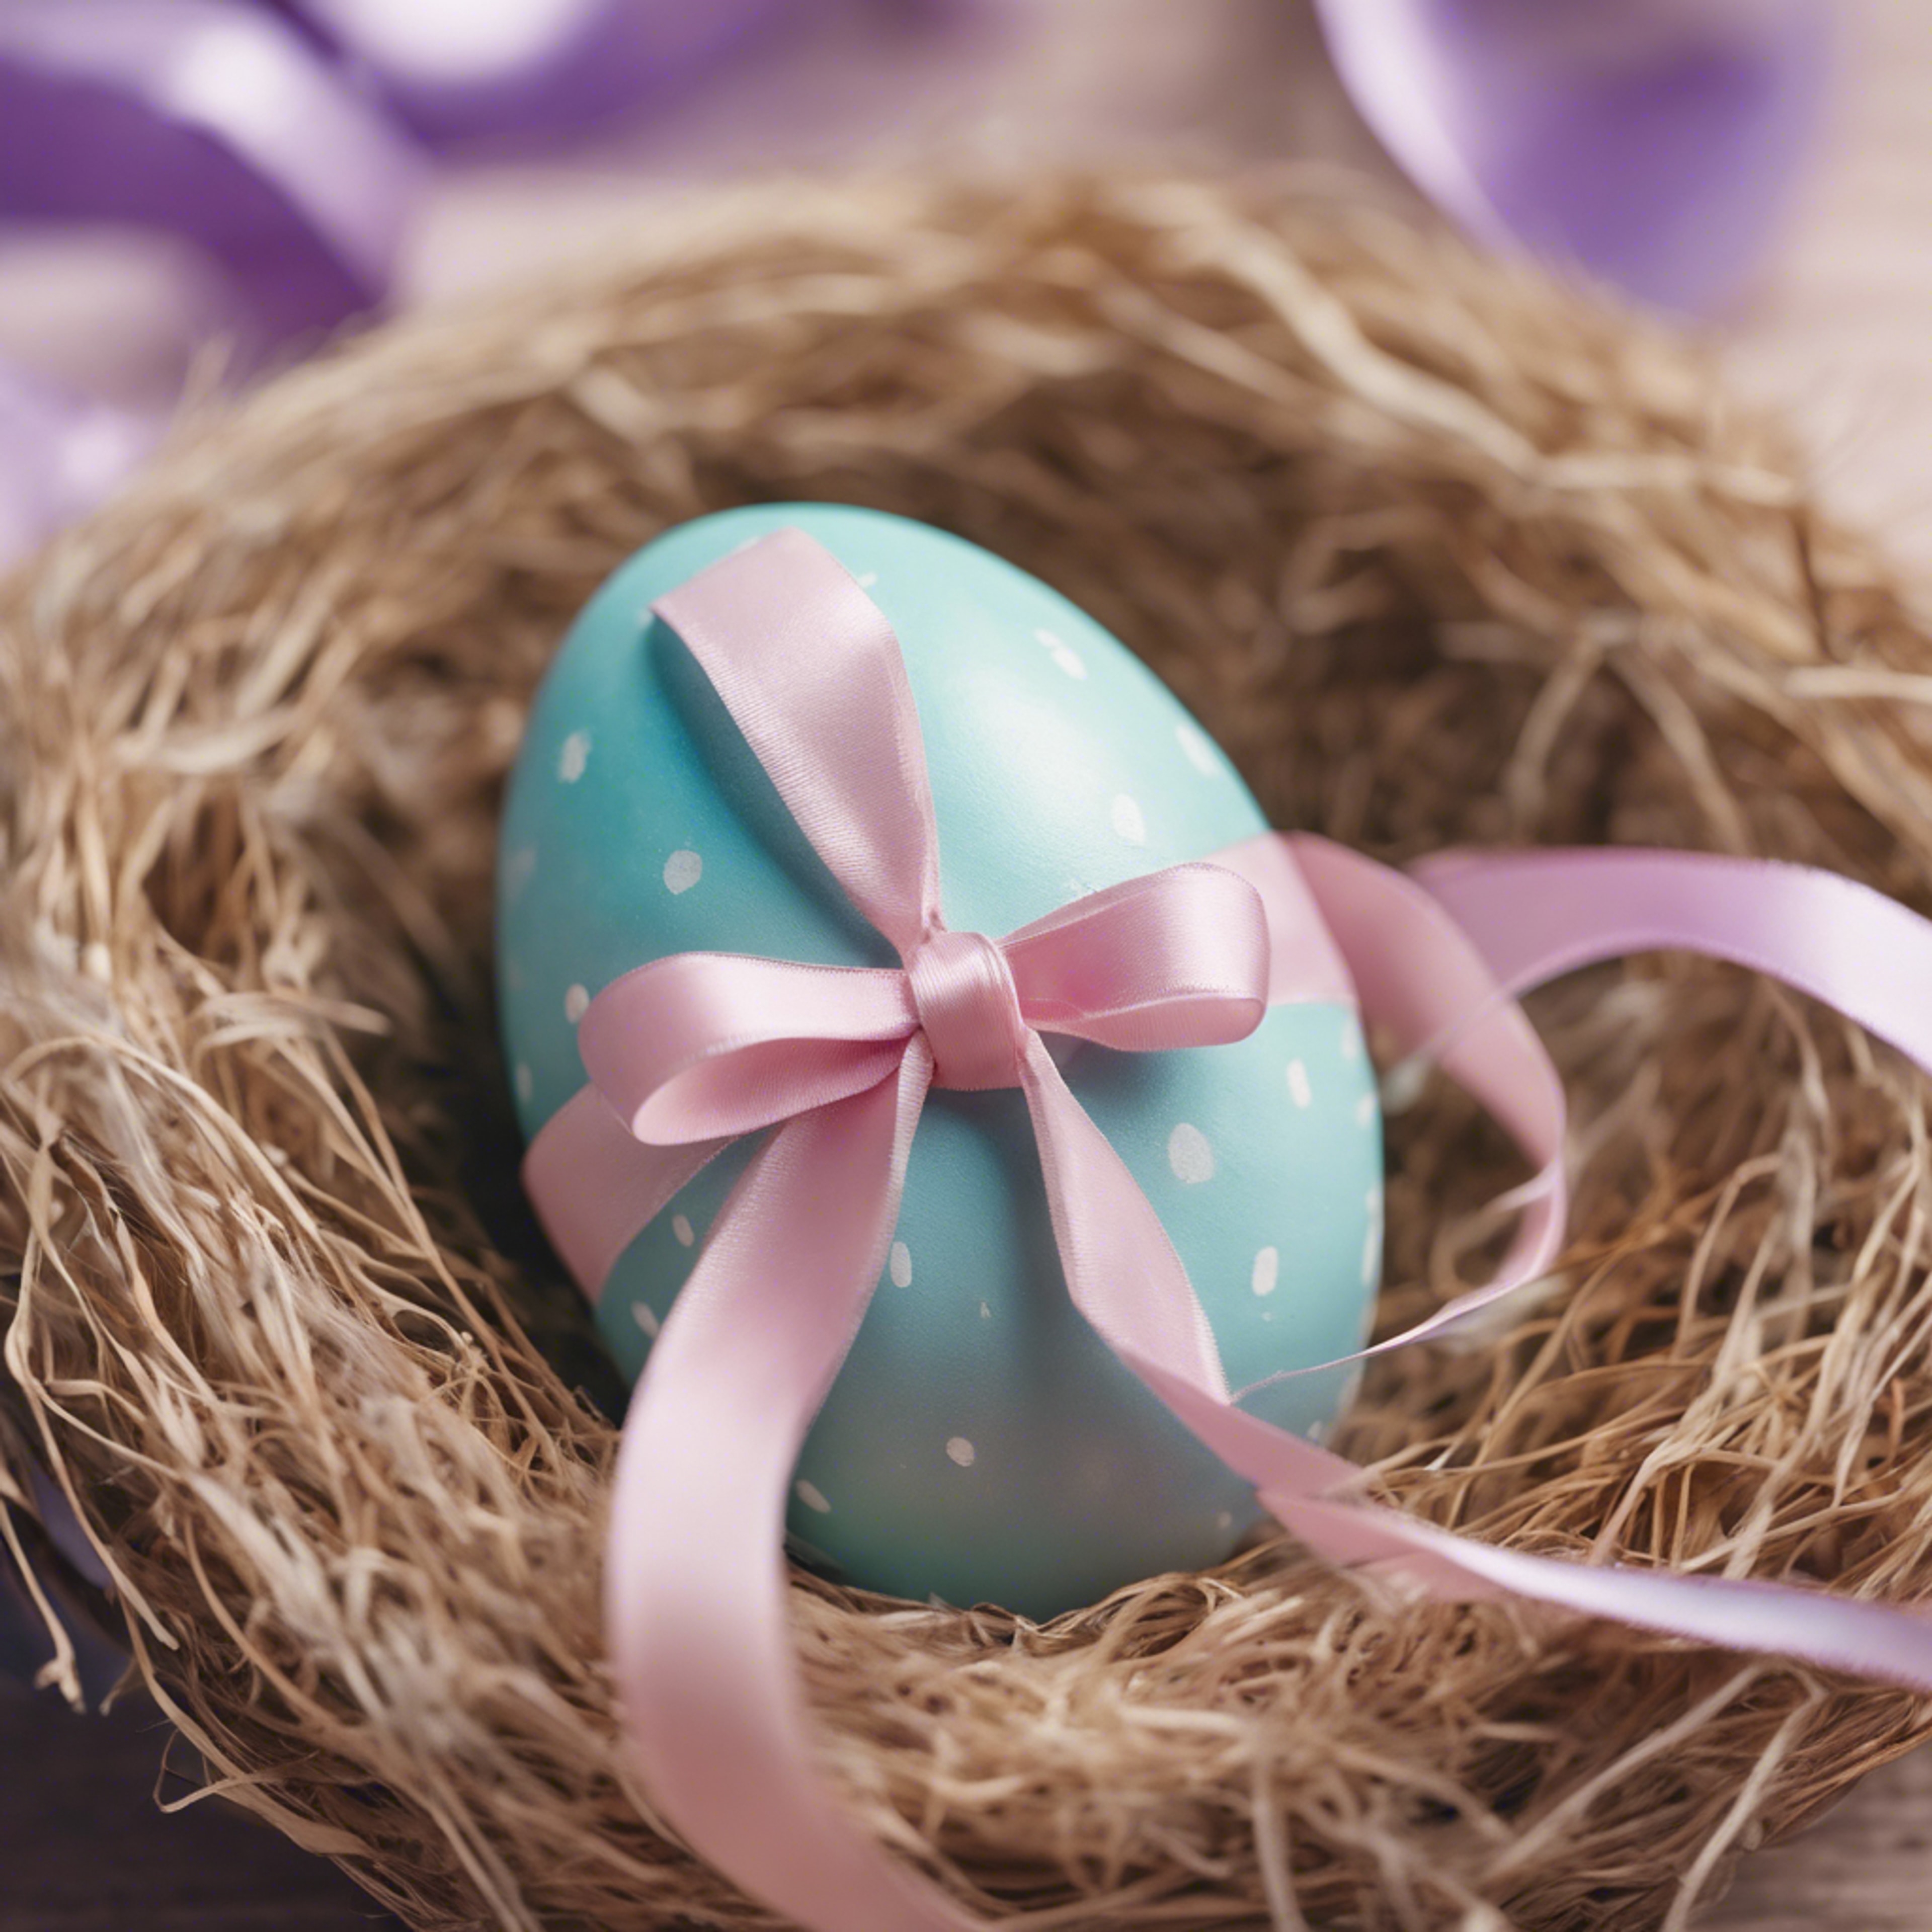 Close-up image of a pastel-colored Easter egg with ribbon details, on a nest. Wallpaper[582f95aee8b94a49b4e5]